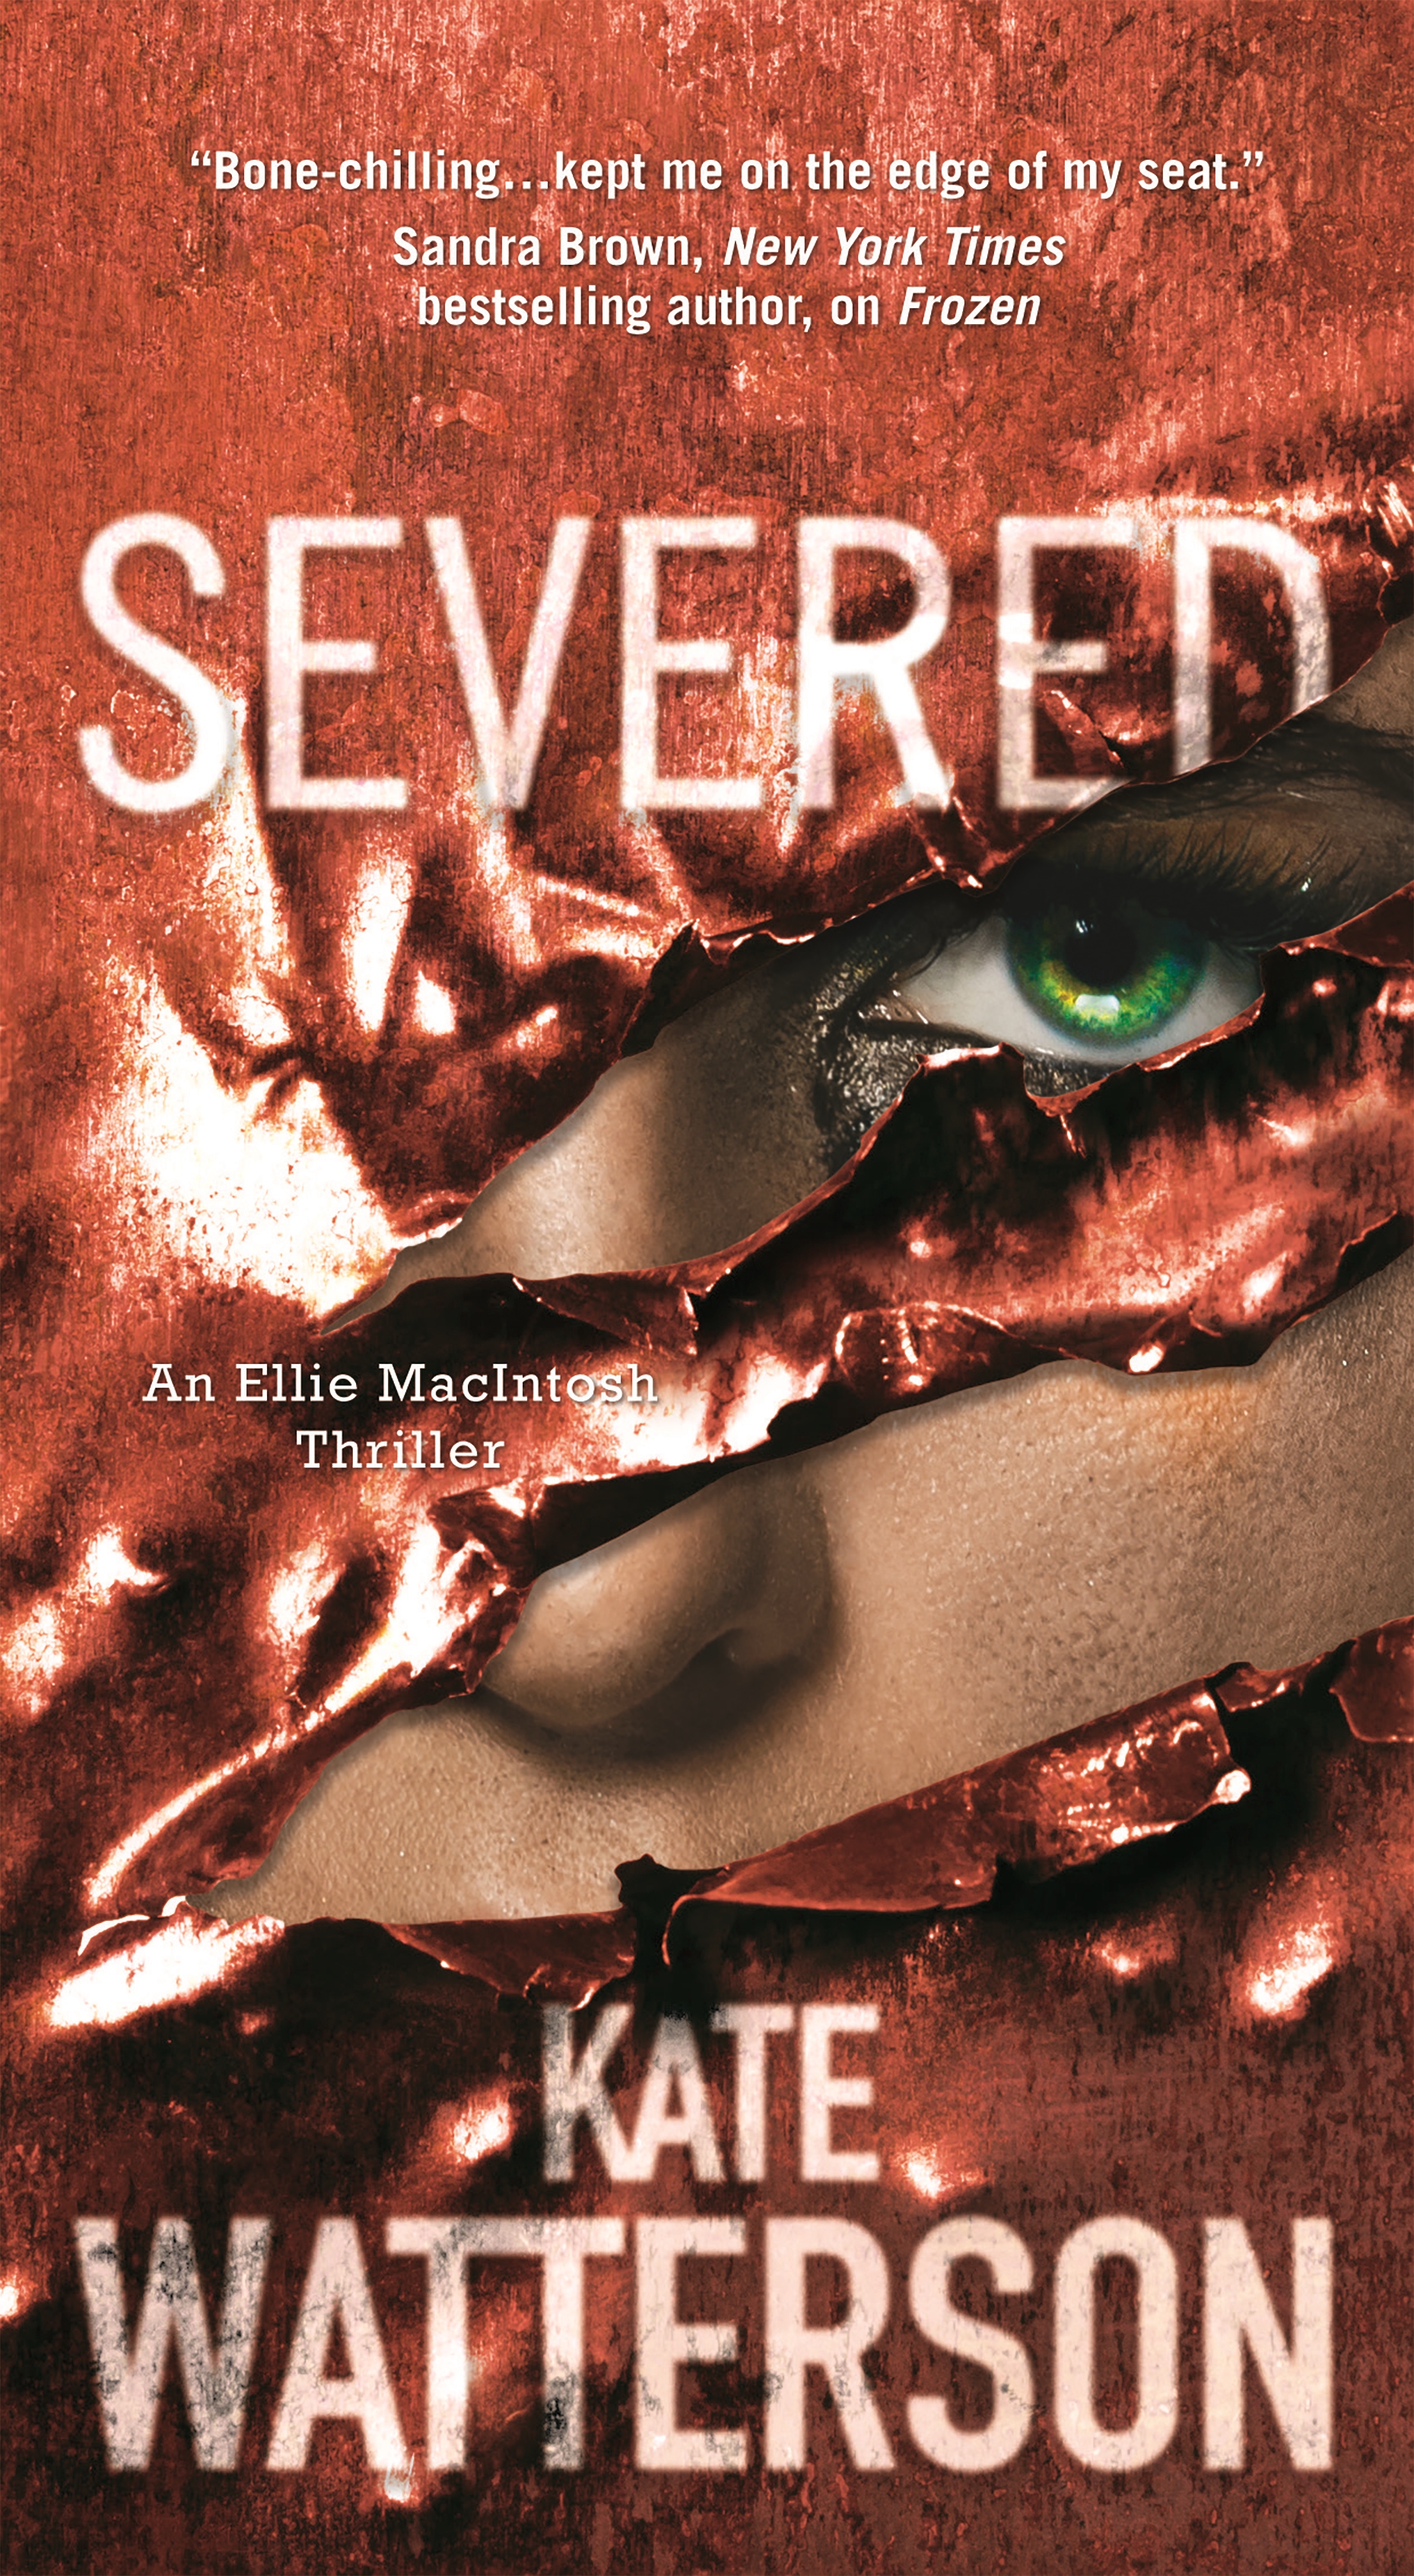 Severed by Kate Watterson